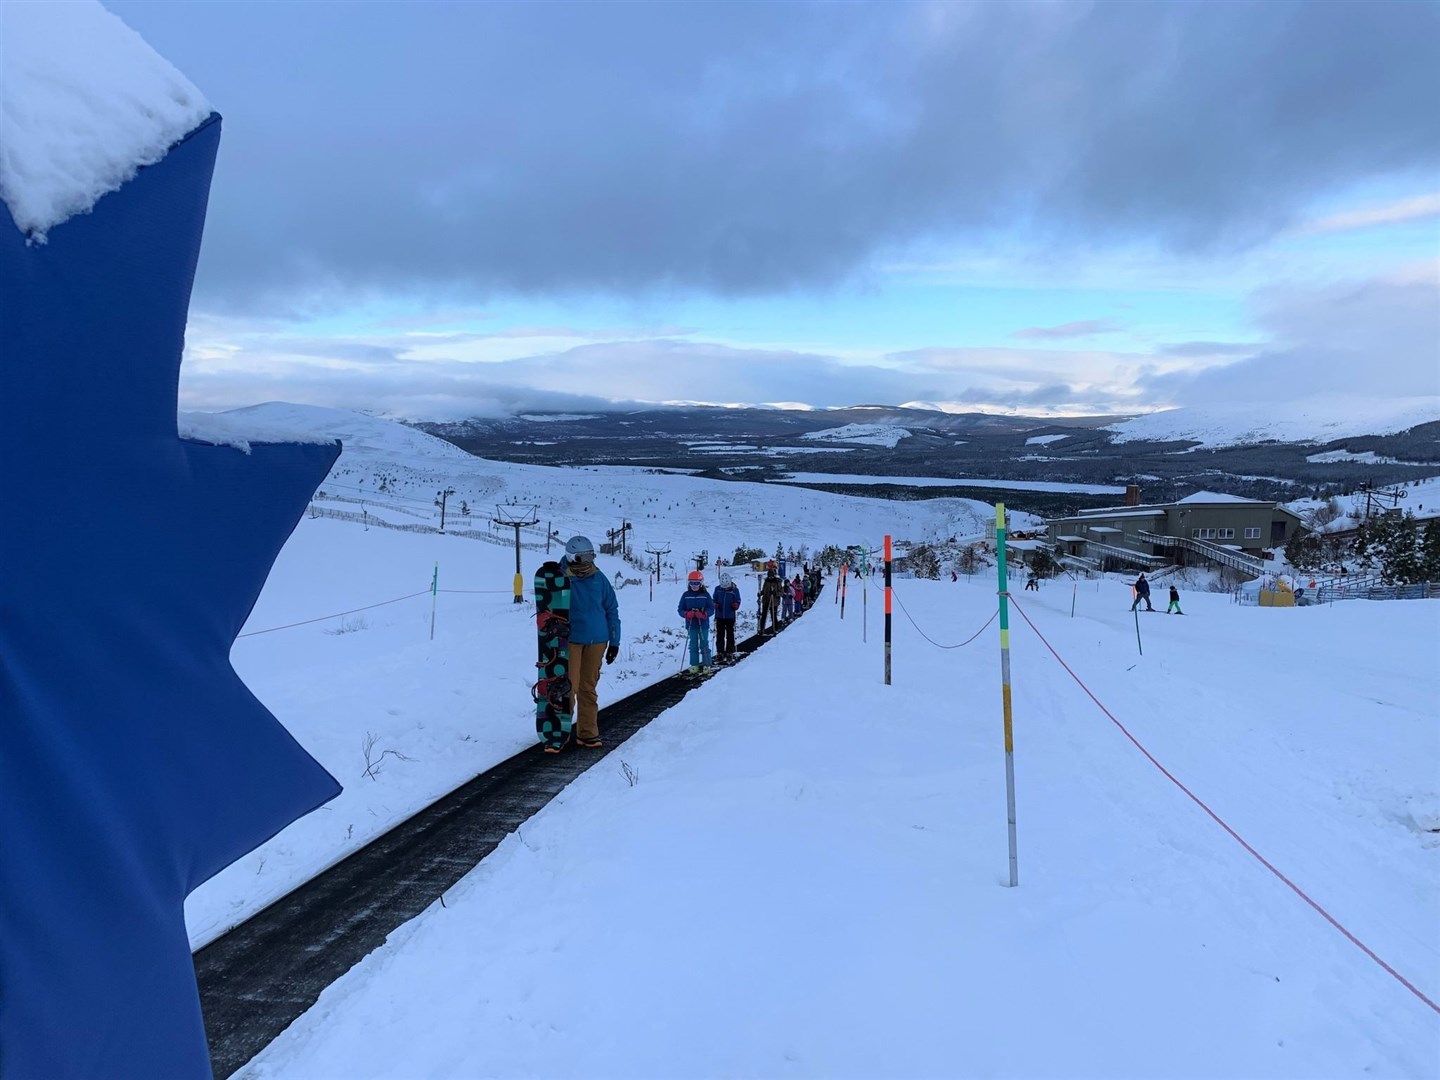 The two new magic carpets started running at Cairngorm Mountain in mid December.